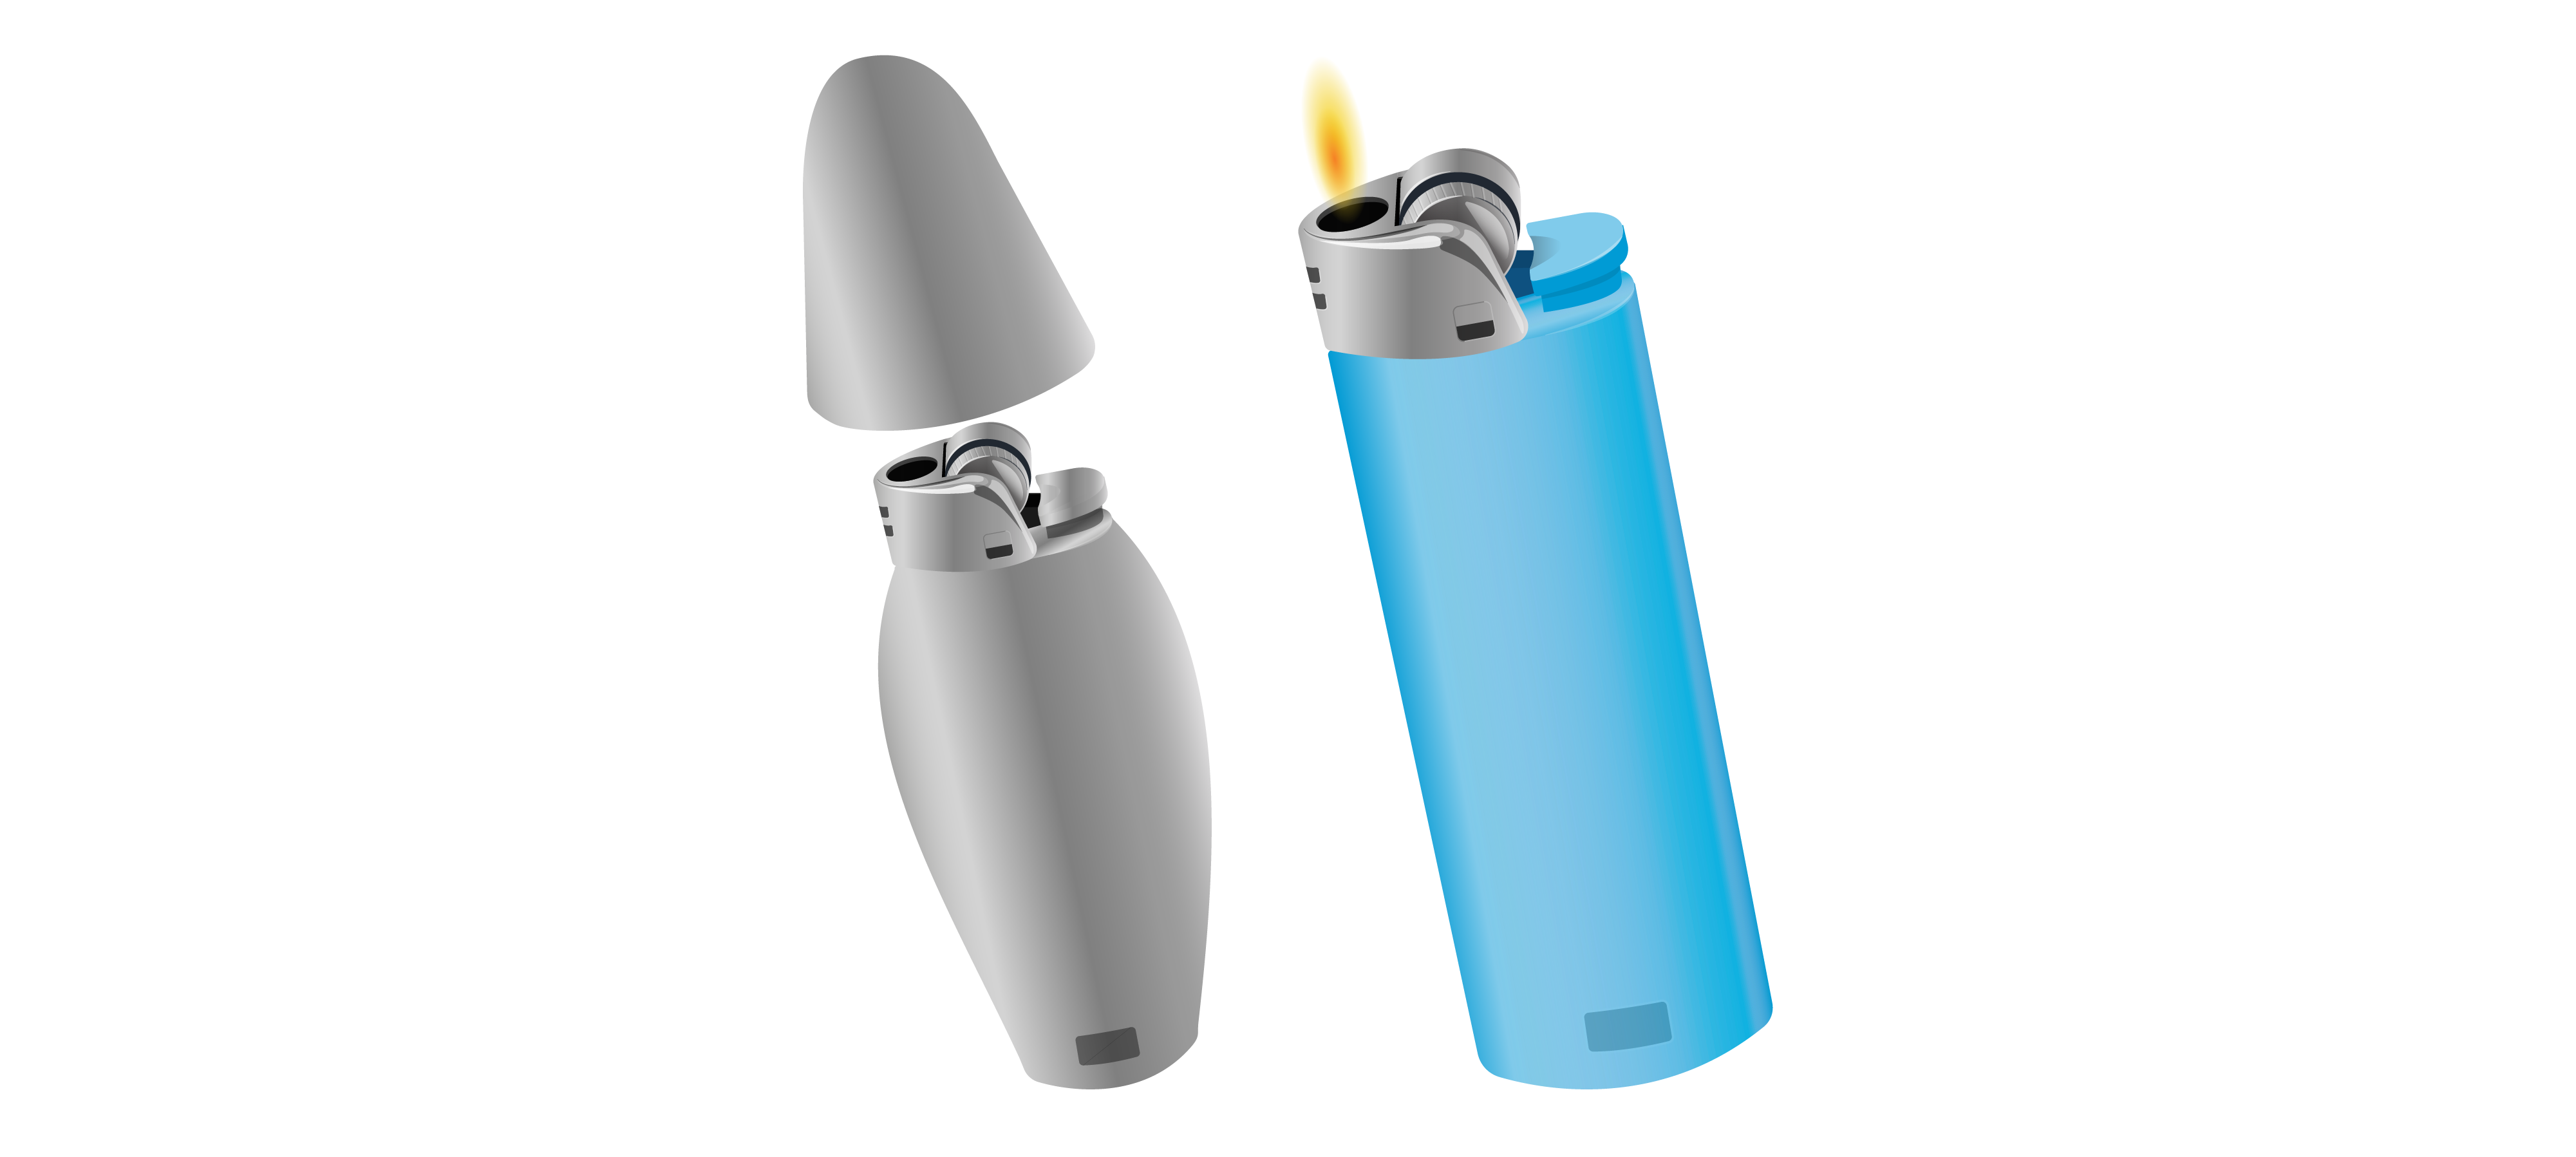 2 lighters side by side with lids slightly off. One on left has curvilinear form with bullet shaped top. The one on the right is a blue plastic cylinder with an oval cross-section and straight lined edges.